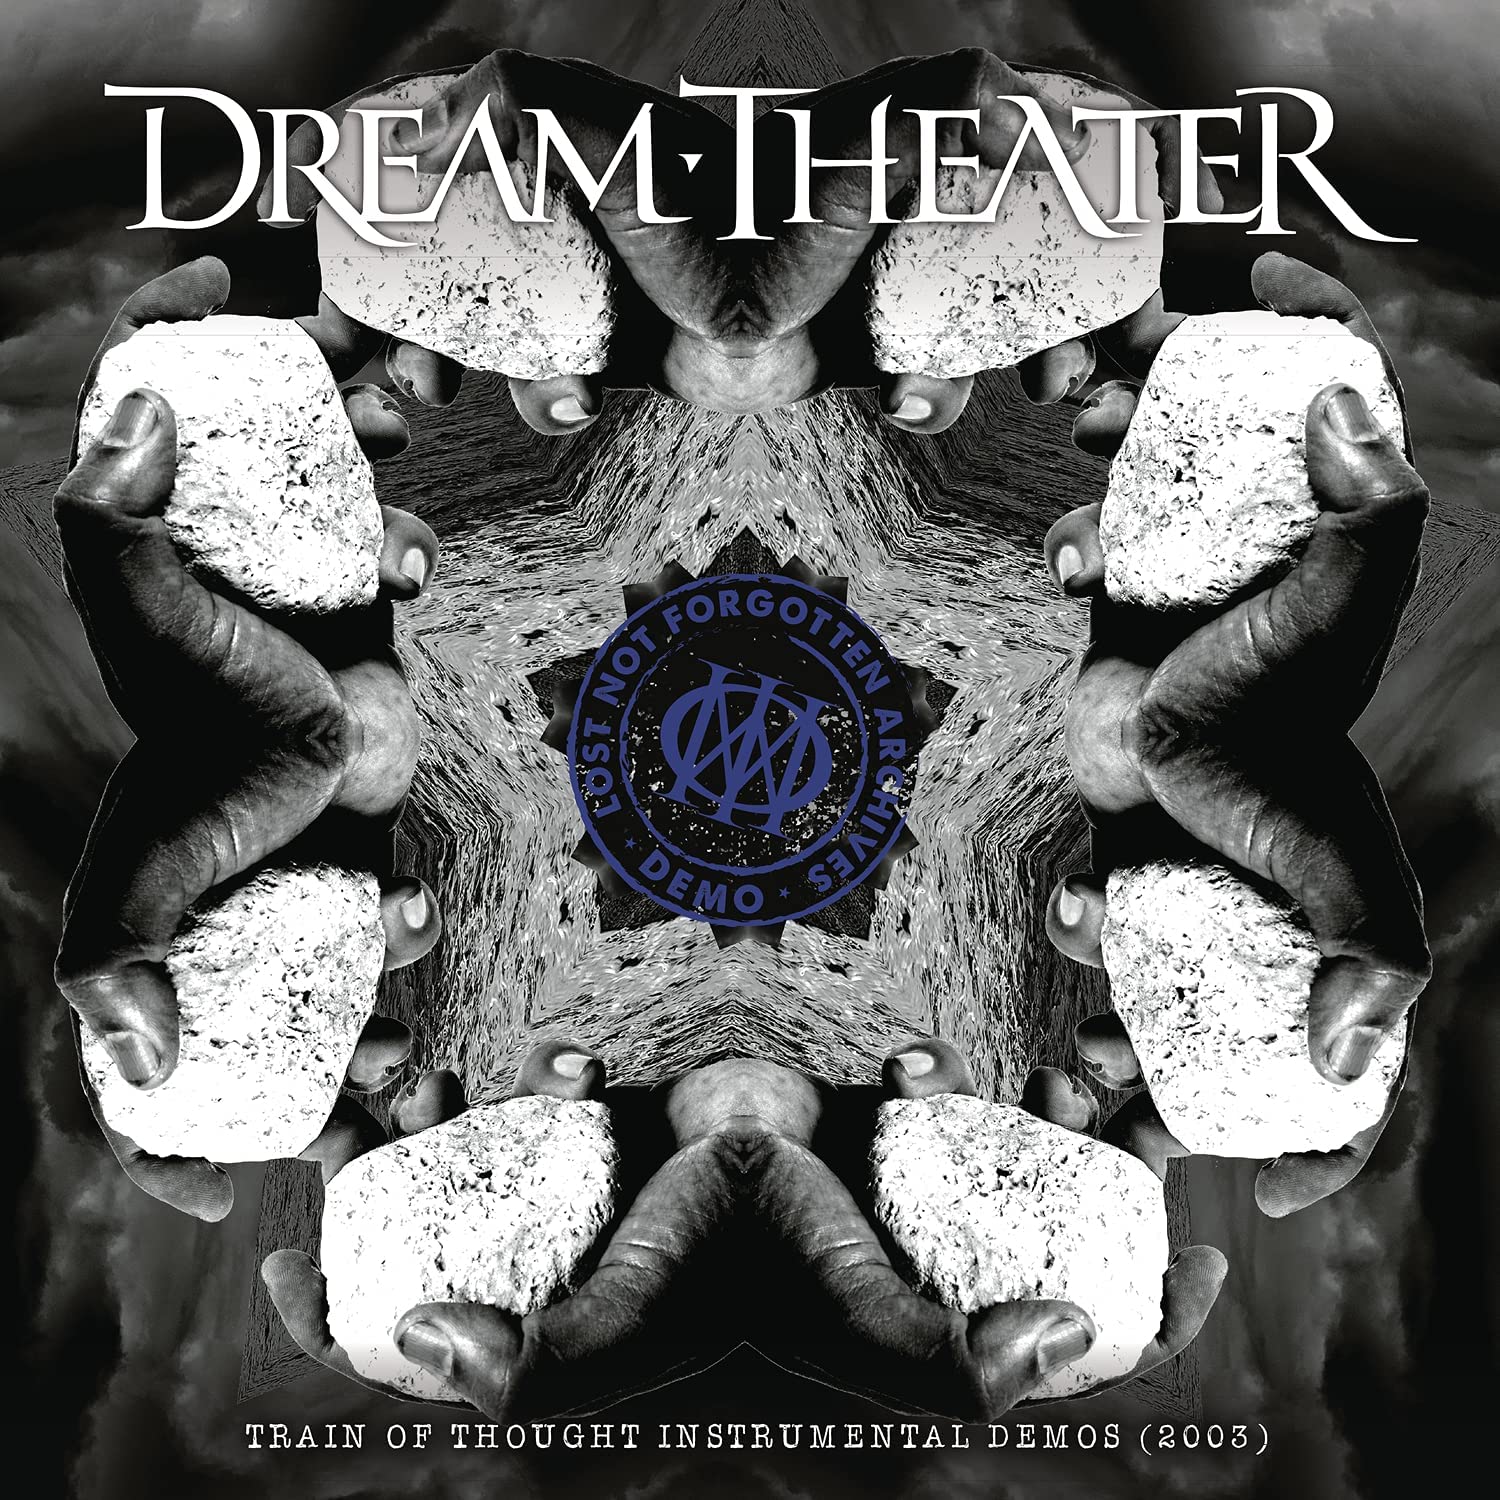 Lost Not Forgotten Archives: Train of Thought Instrumental Demos | Dream Theater